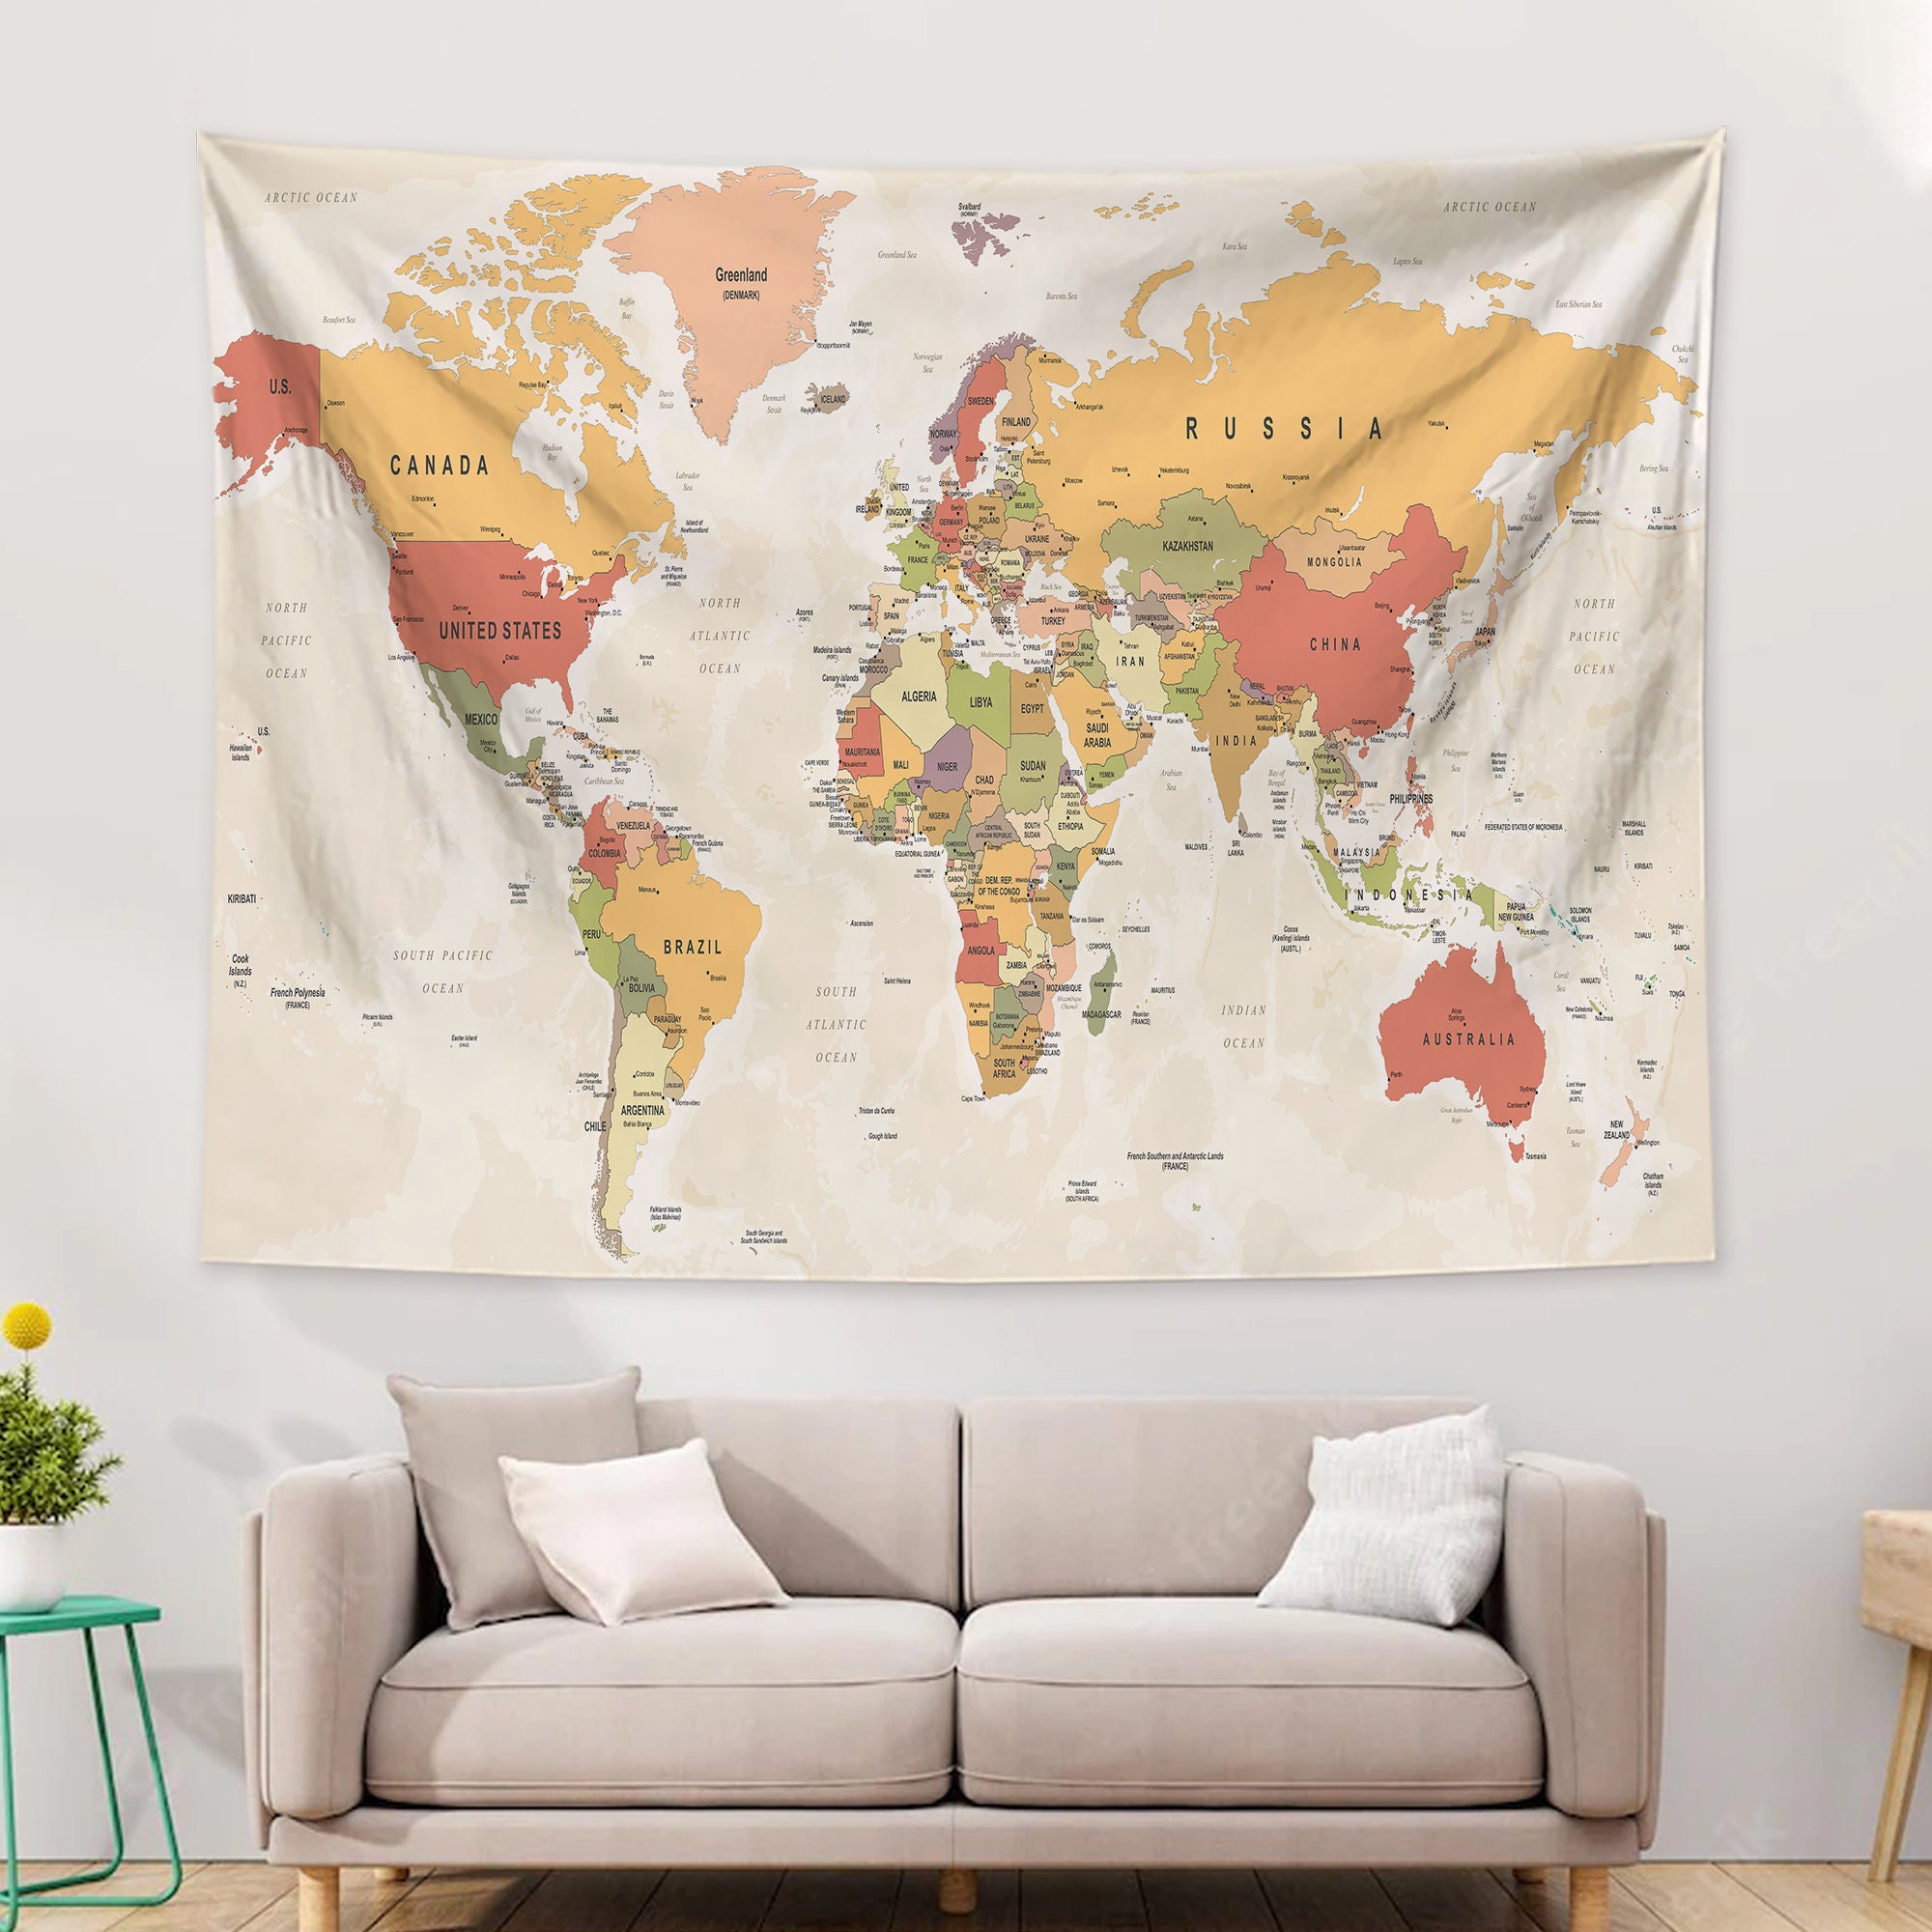 Colorful World Map Decor Painting Tapestry Wall Hanging Living Room Bedroom Dorm 